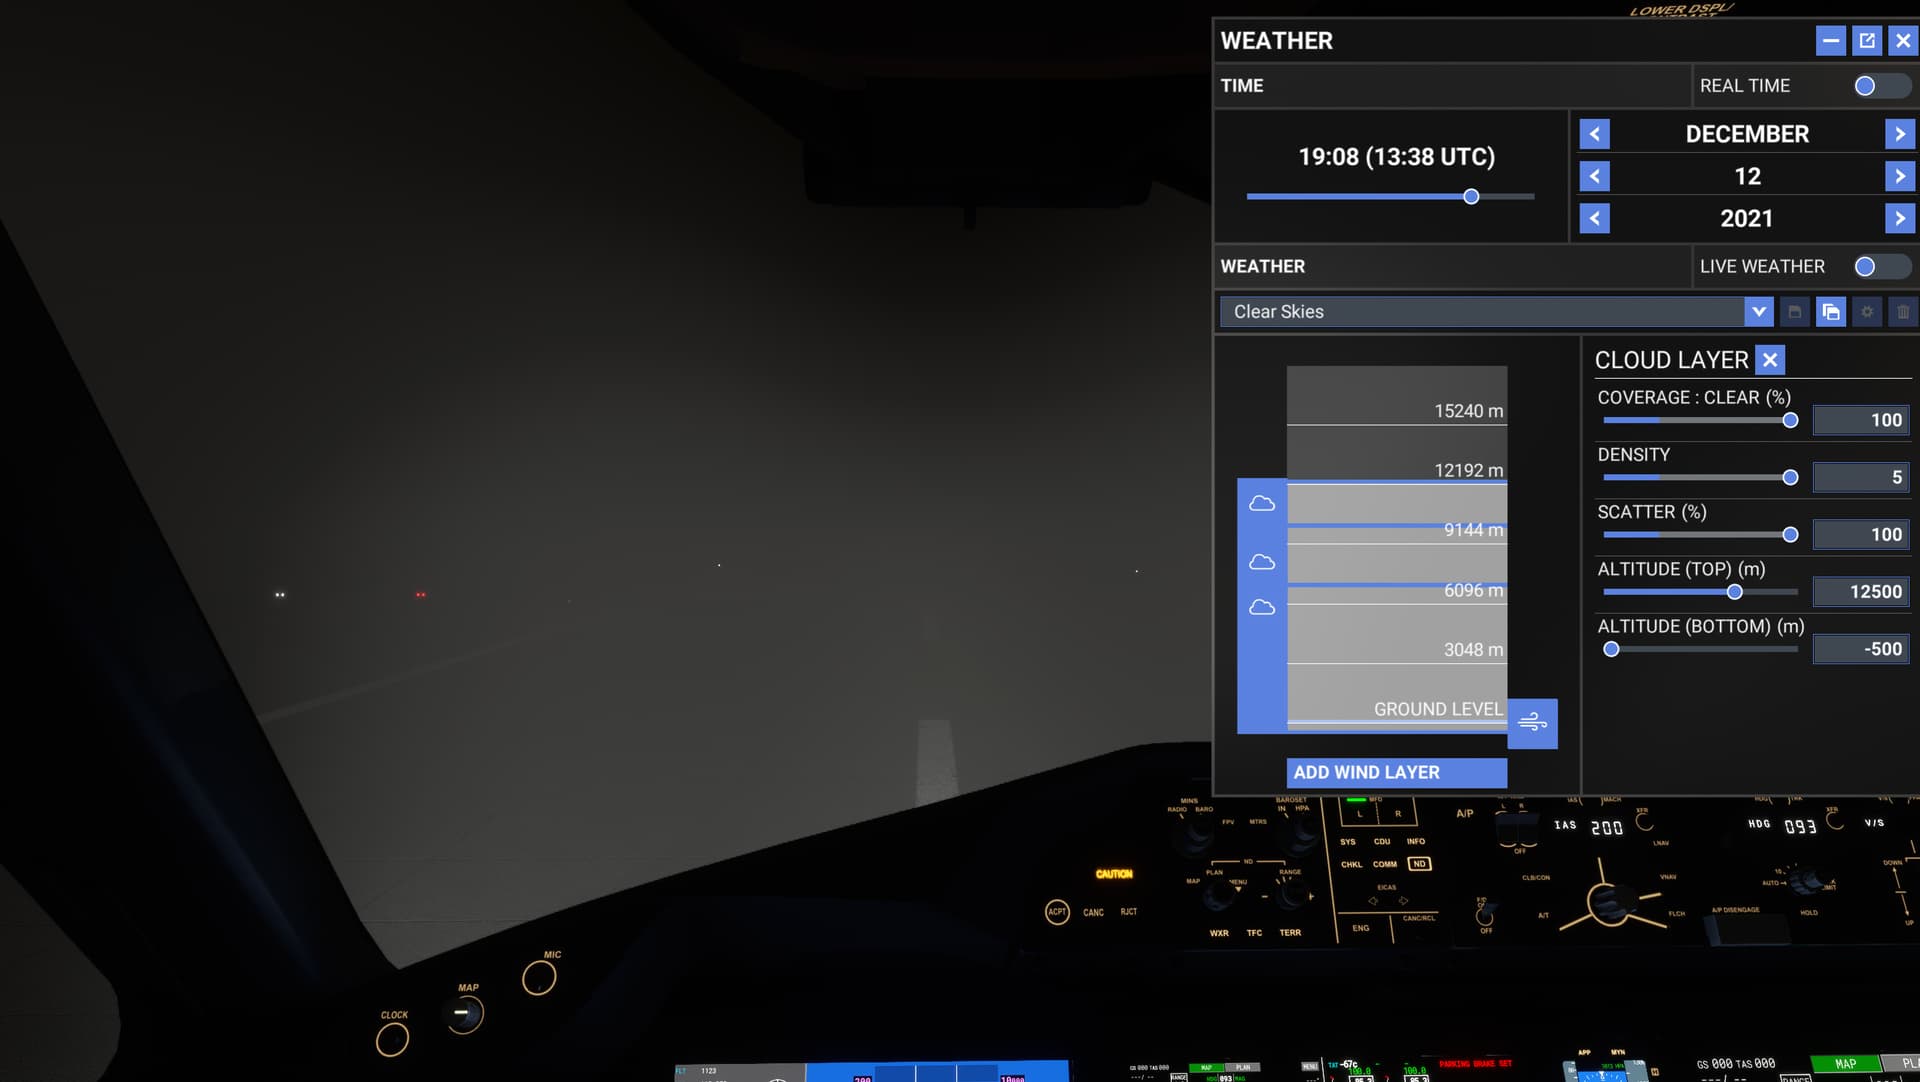 IFR Visibility - General Discussion - Microsoft Flight Simulator Forums